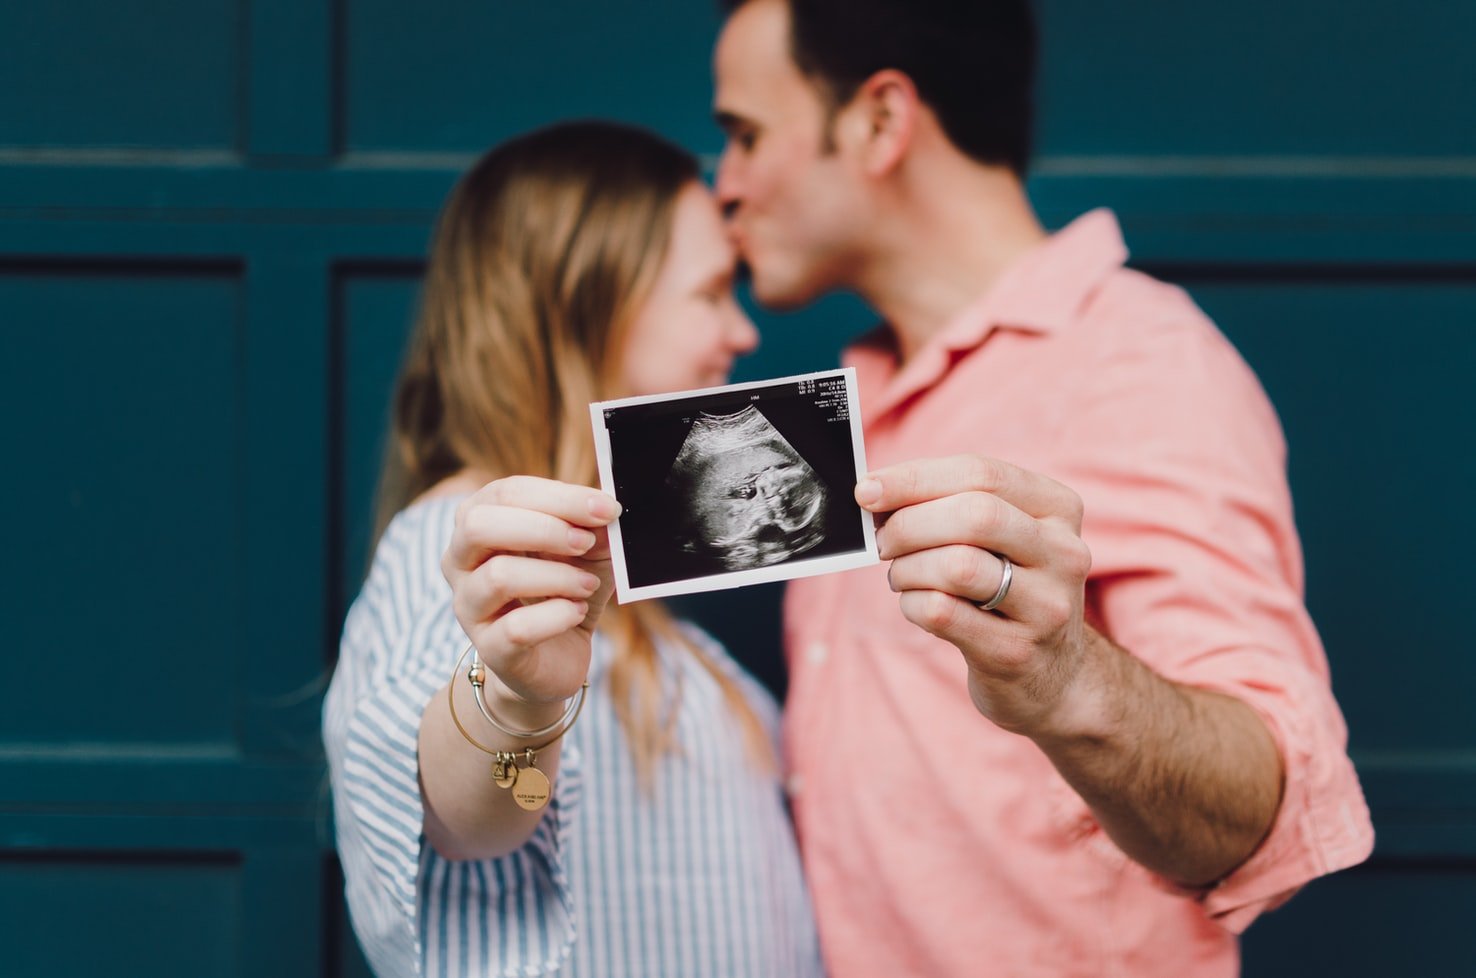 Lynn and Don were delighted to discover they were expecting a baby | Source: Unsplash